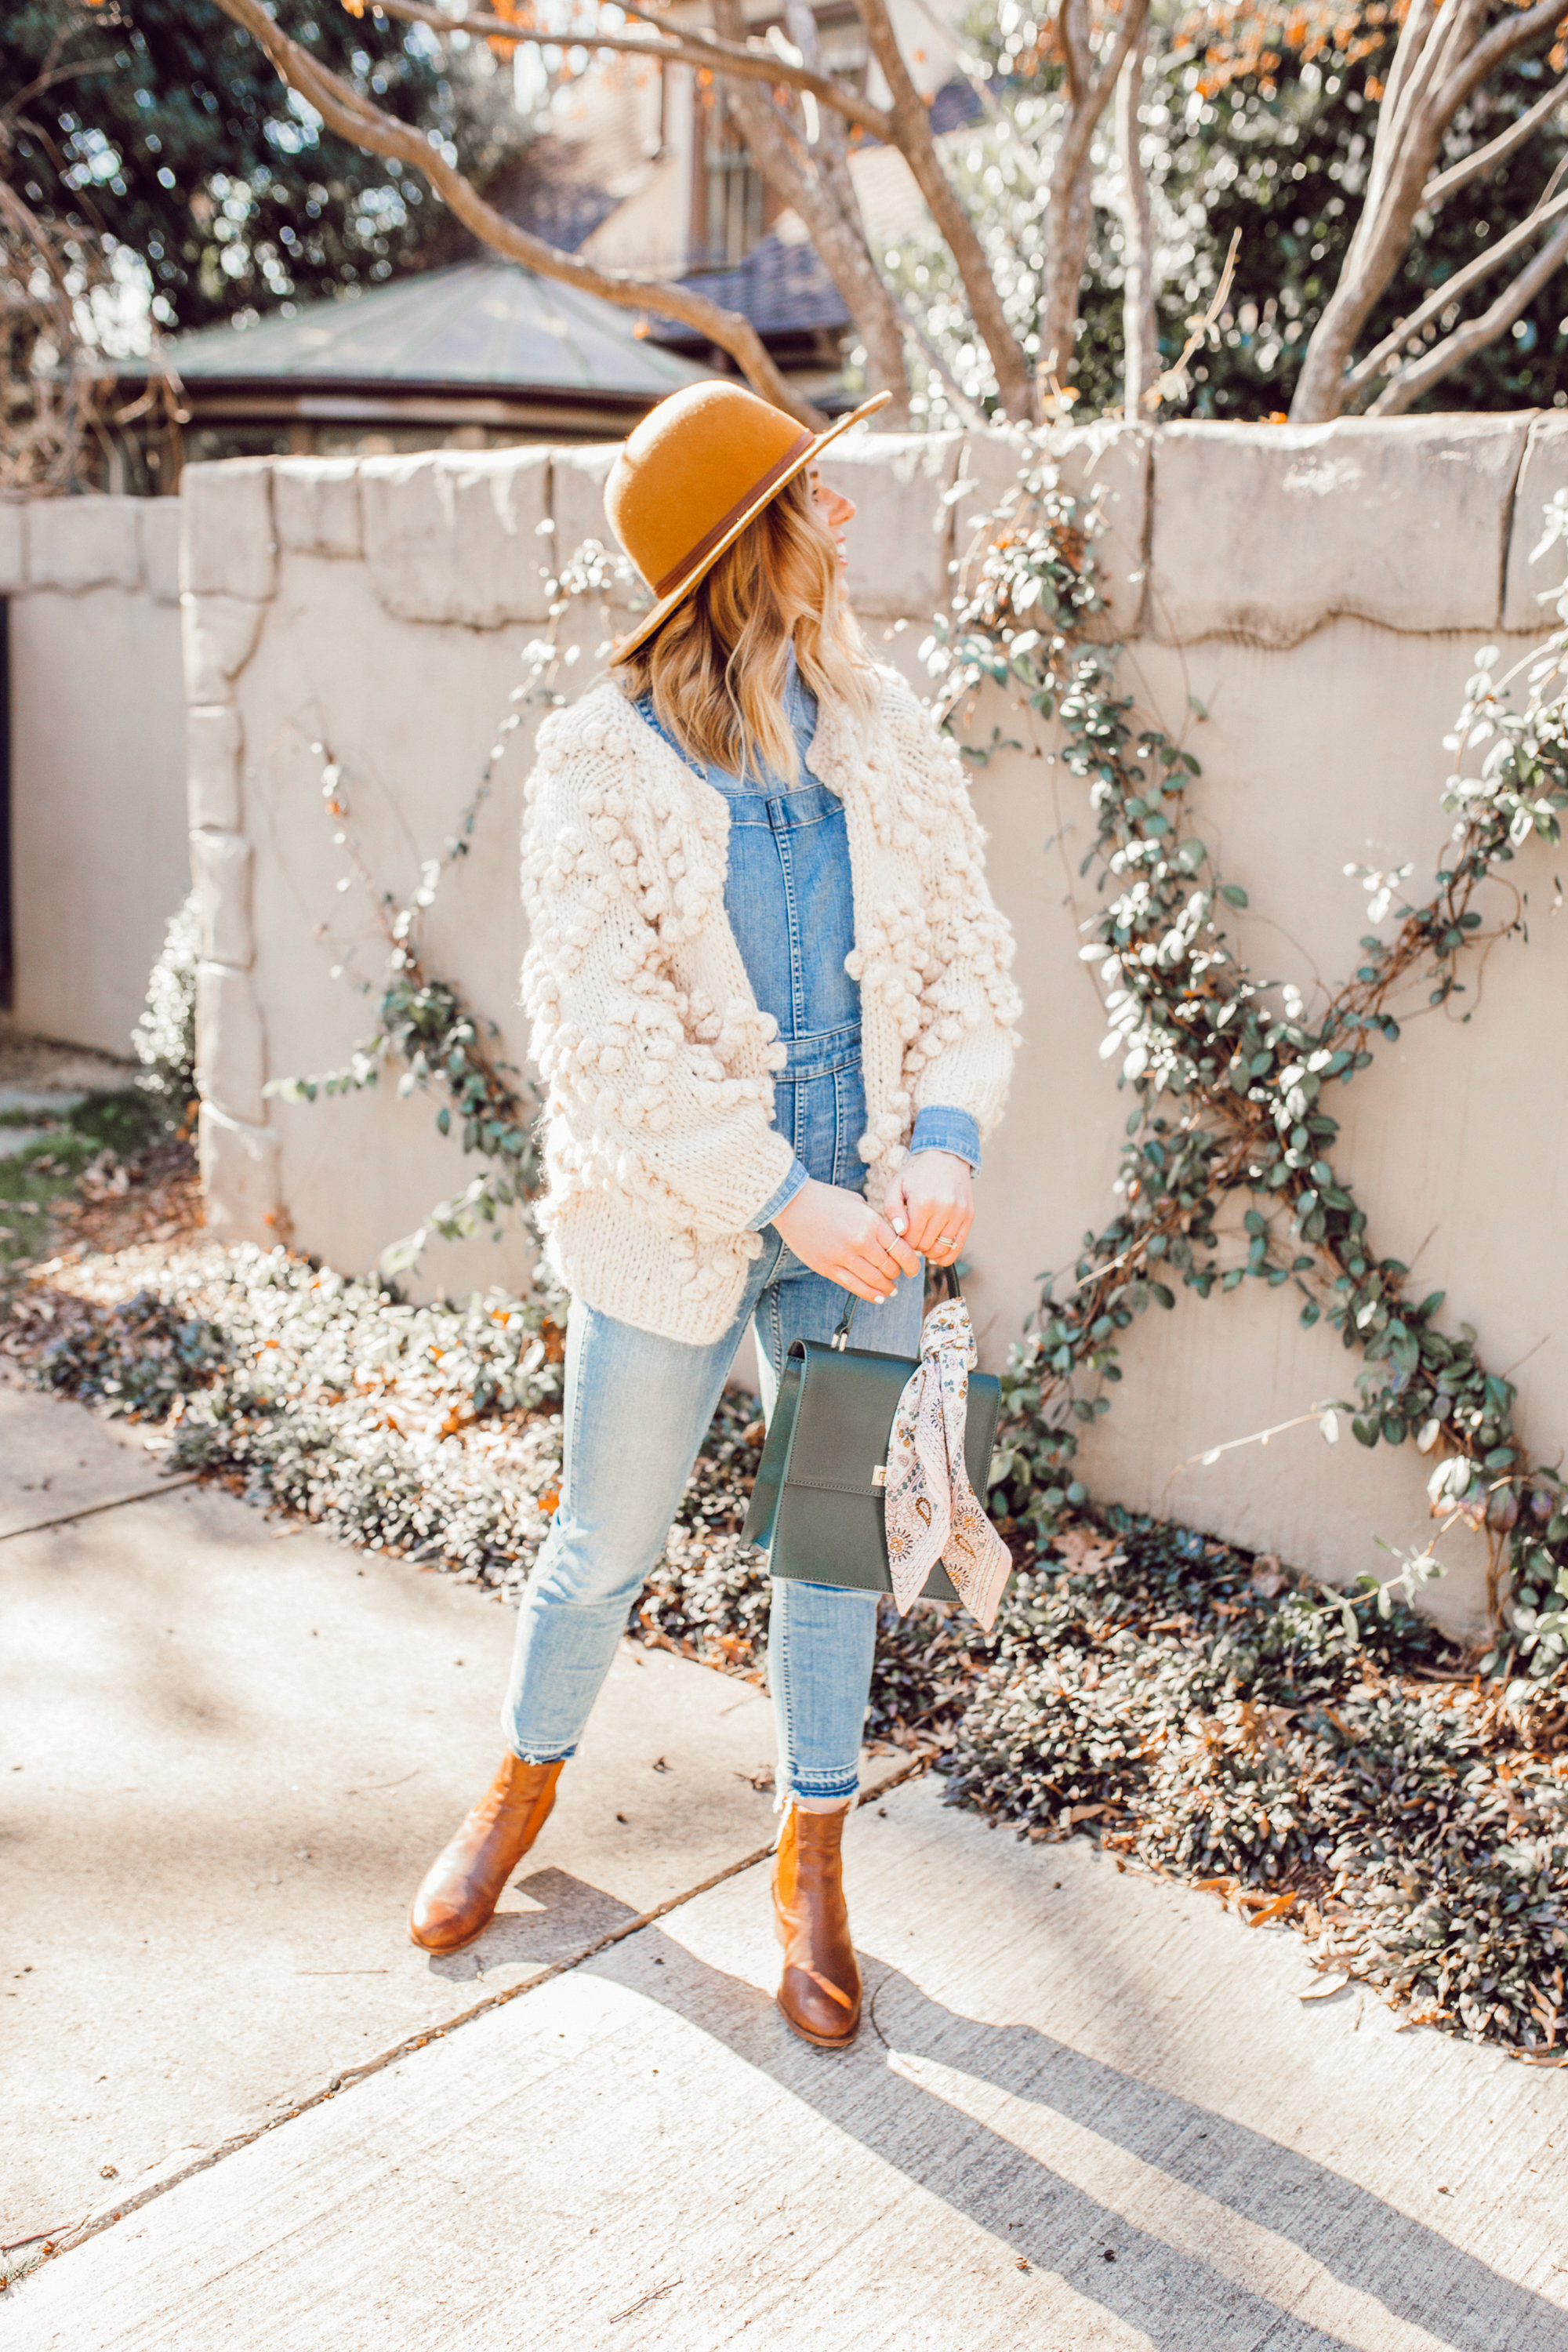 The Importance of Buying Pieces You LOVE - Even If Trendy featured on top US life and style blog Louella Reese| Image of a woman wearing Chicwish Knit Your Love Cardigan, Madewell Overalls, Yellow Wool Hat, Ariat Two24 Wilder Boots, and Neely & Chloe Ladylike Handbag.